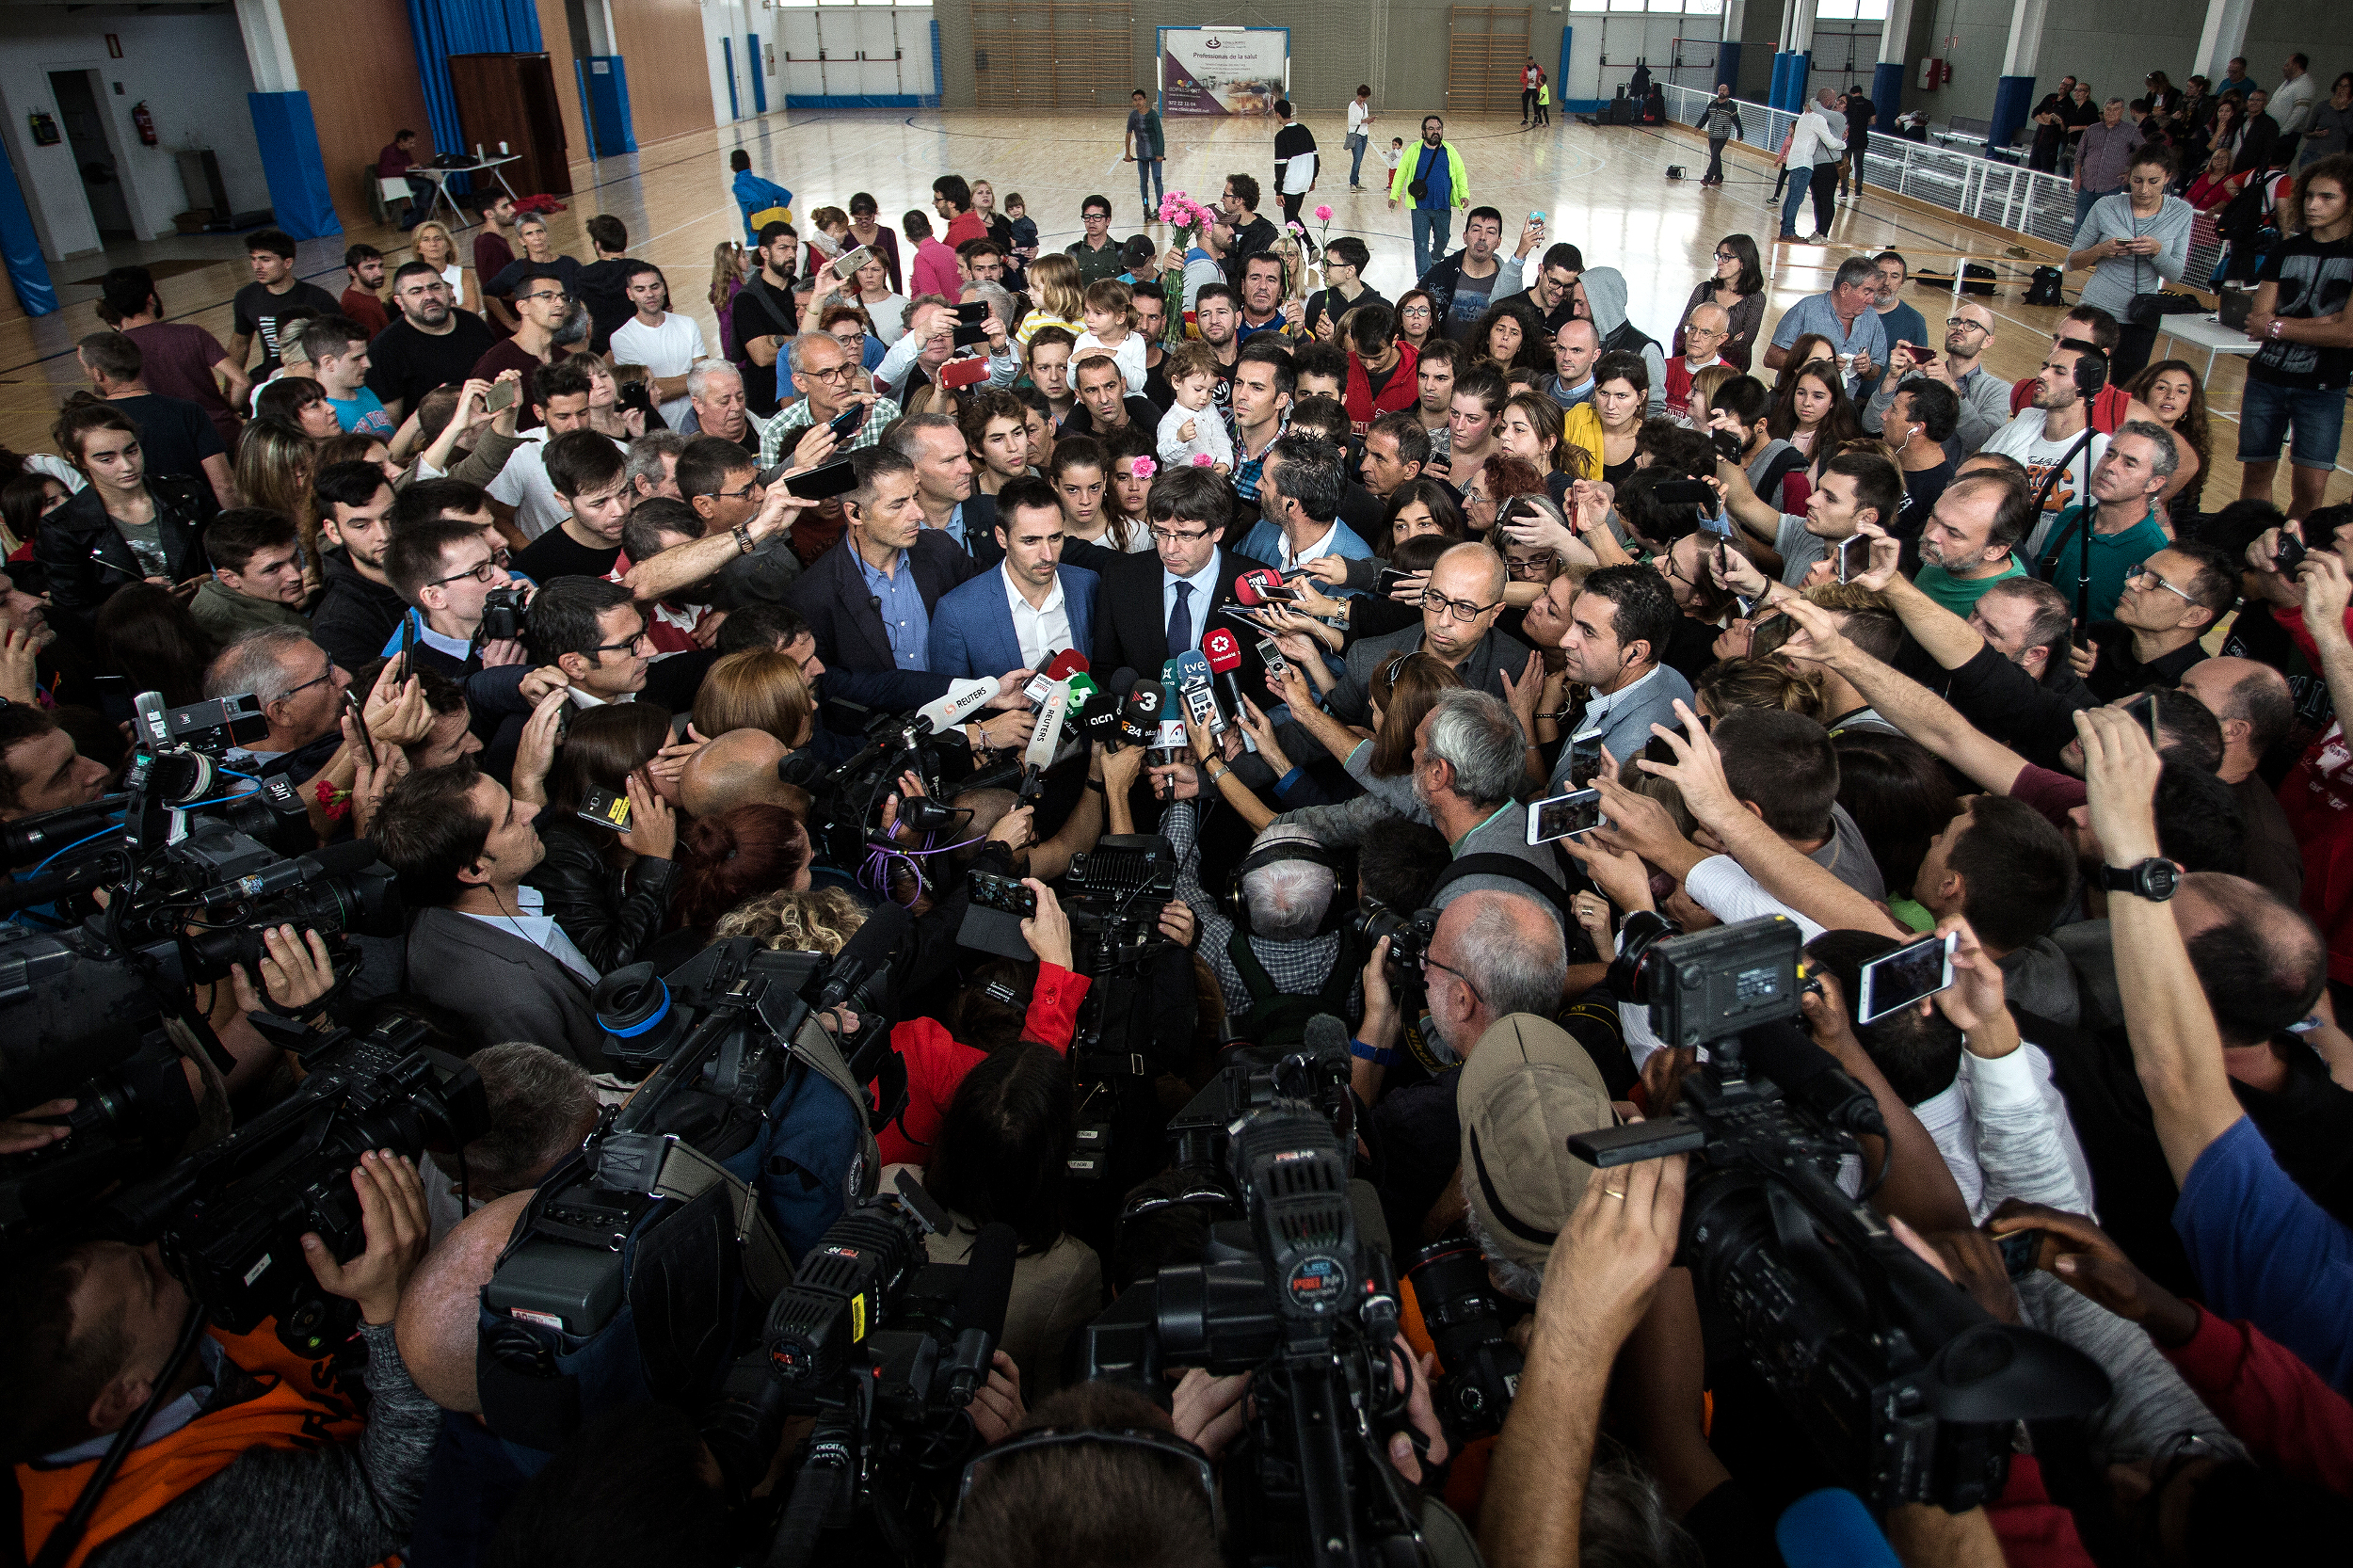 Catalan president Carles Puigdemont at a polling station on referendum day (by Carles Palacio)